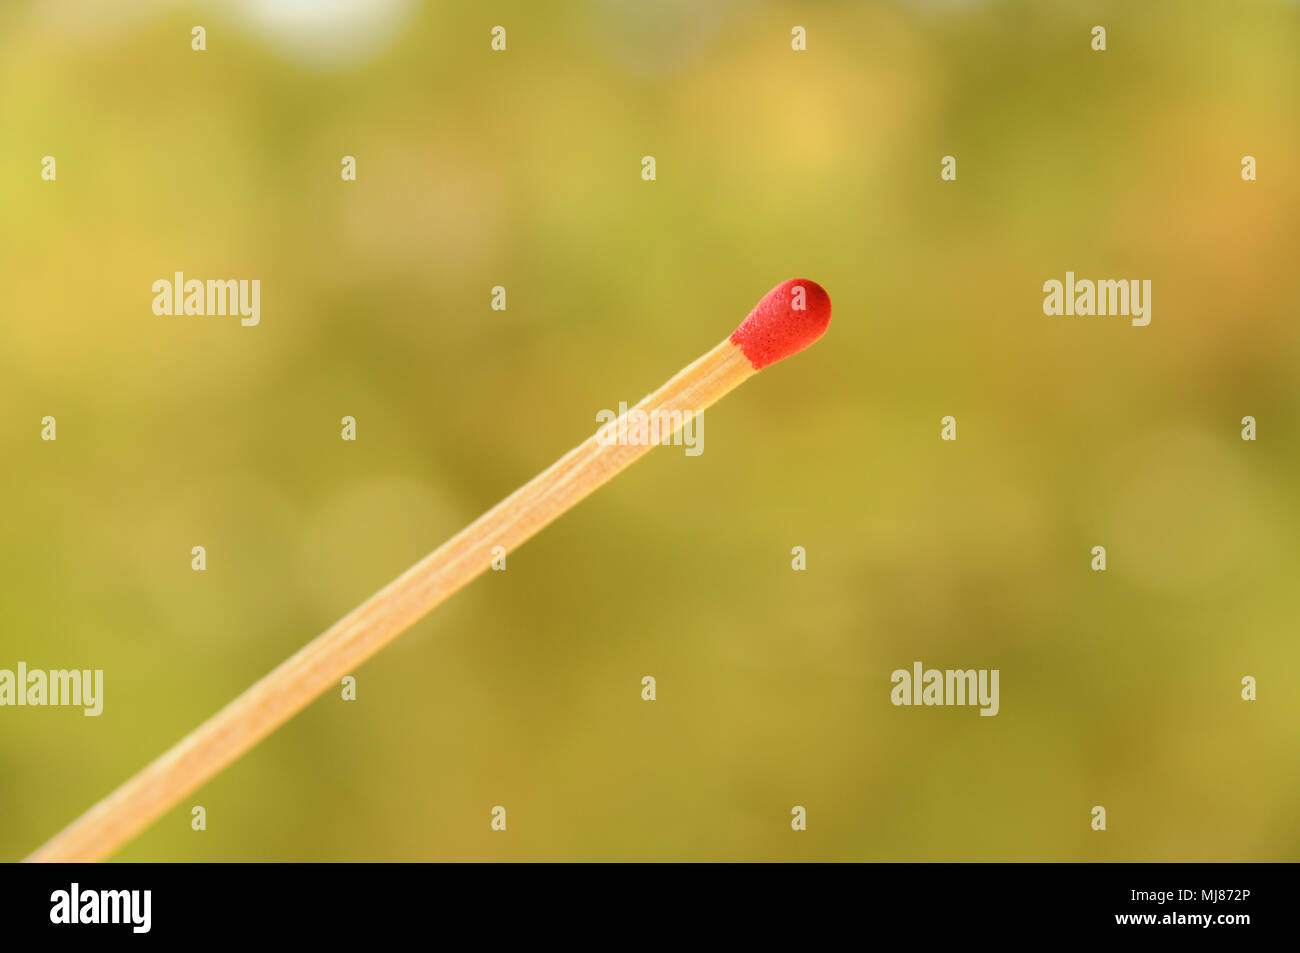 Single matchstick on blurred background Stock Photo